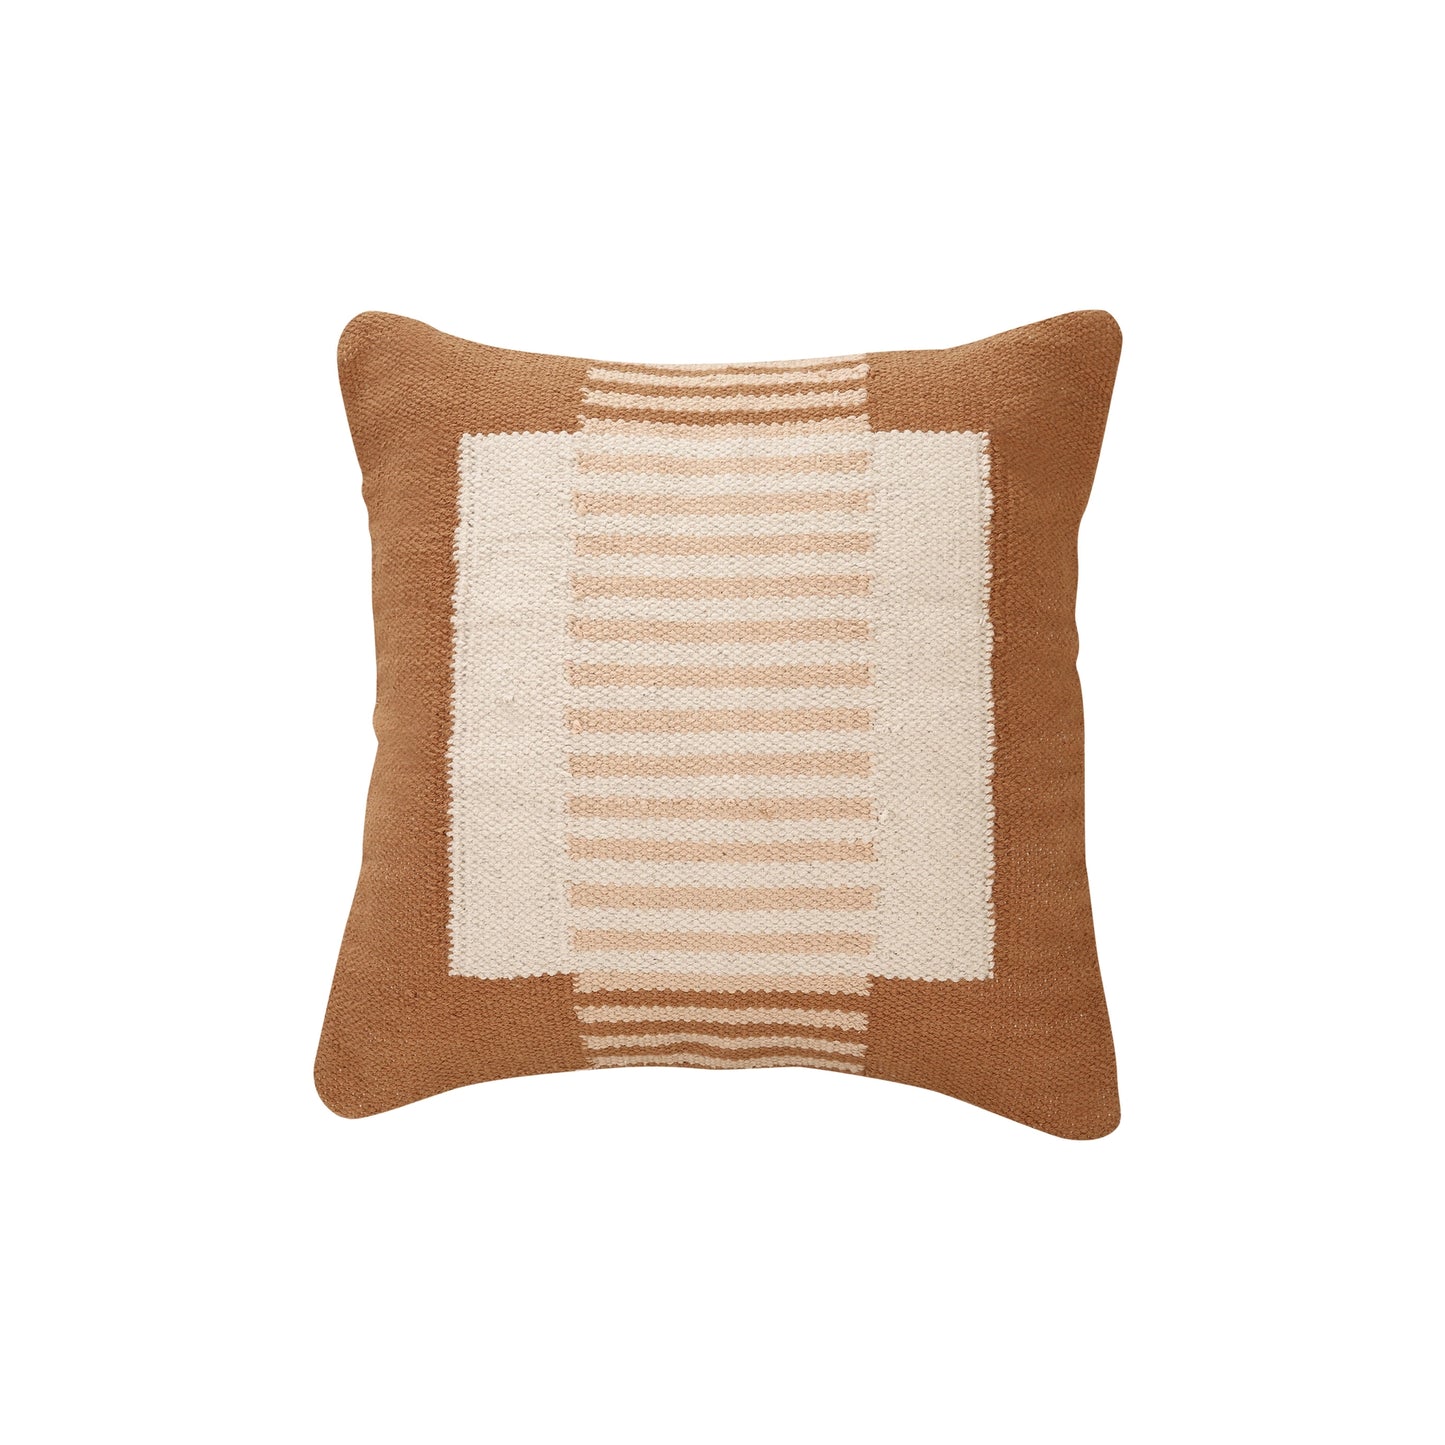 Casa Amarosa - Handcrafted Earth Stripe Accent Pillow, Rust - 18x18 inch